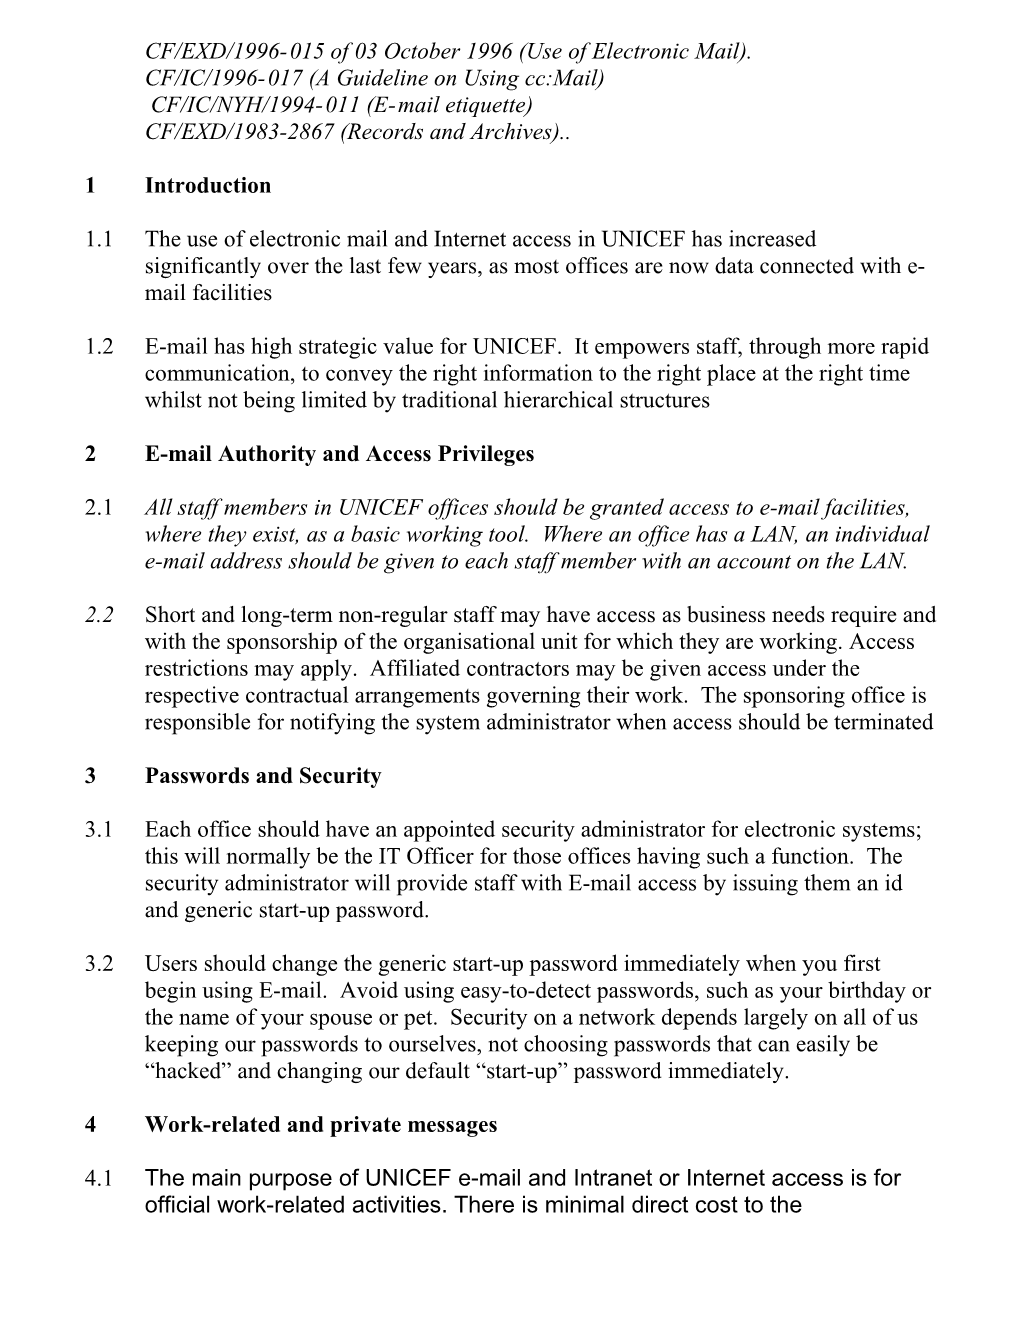 UNICEF Cc:Mail Users Policy Guideline